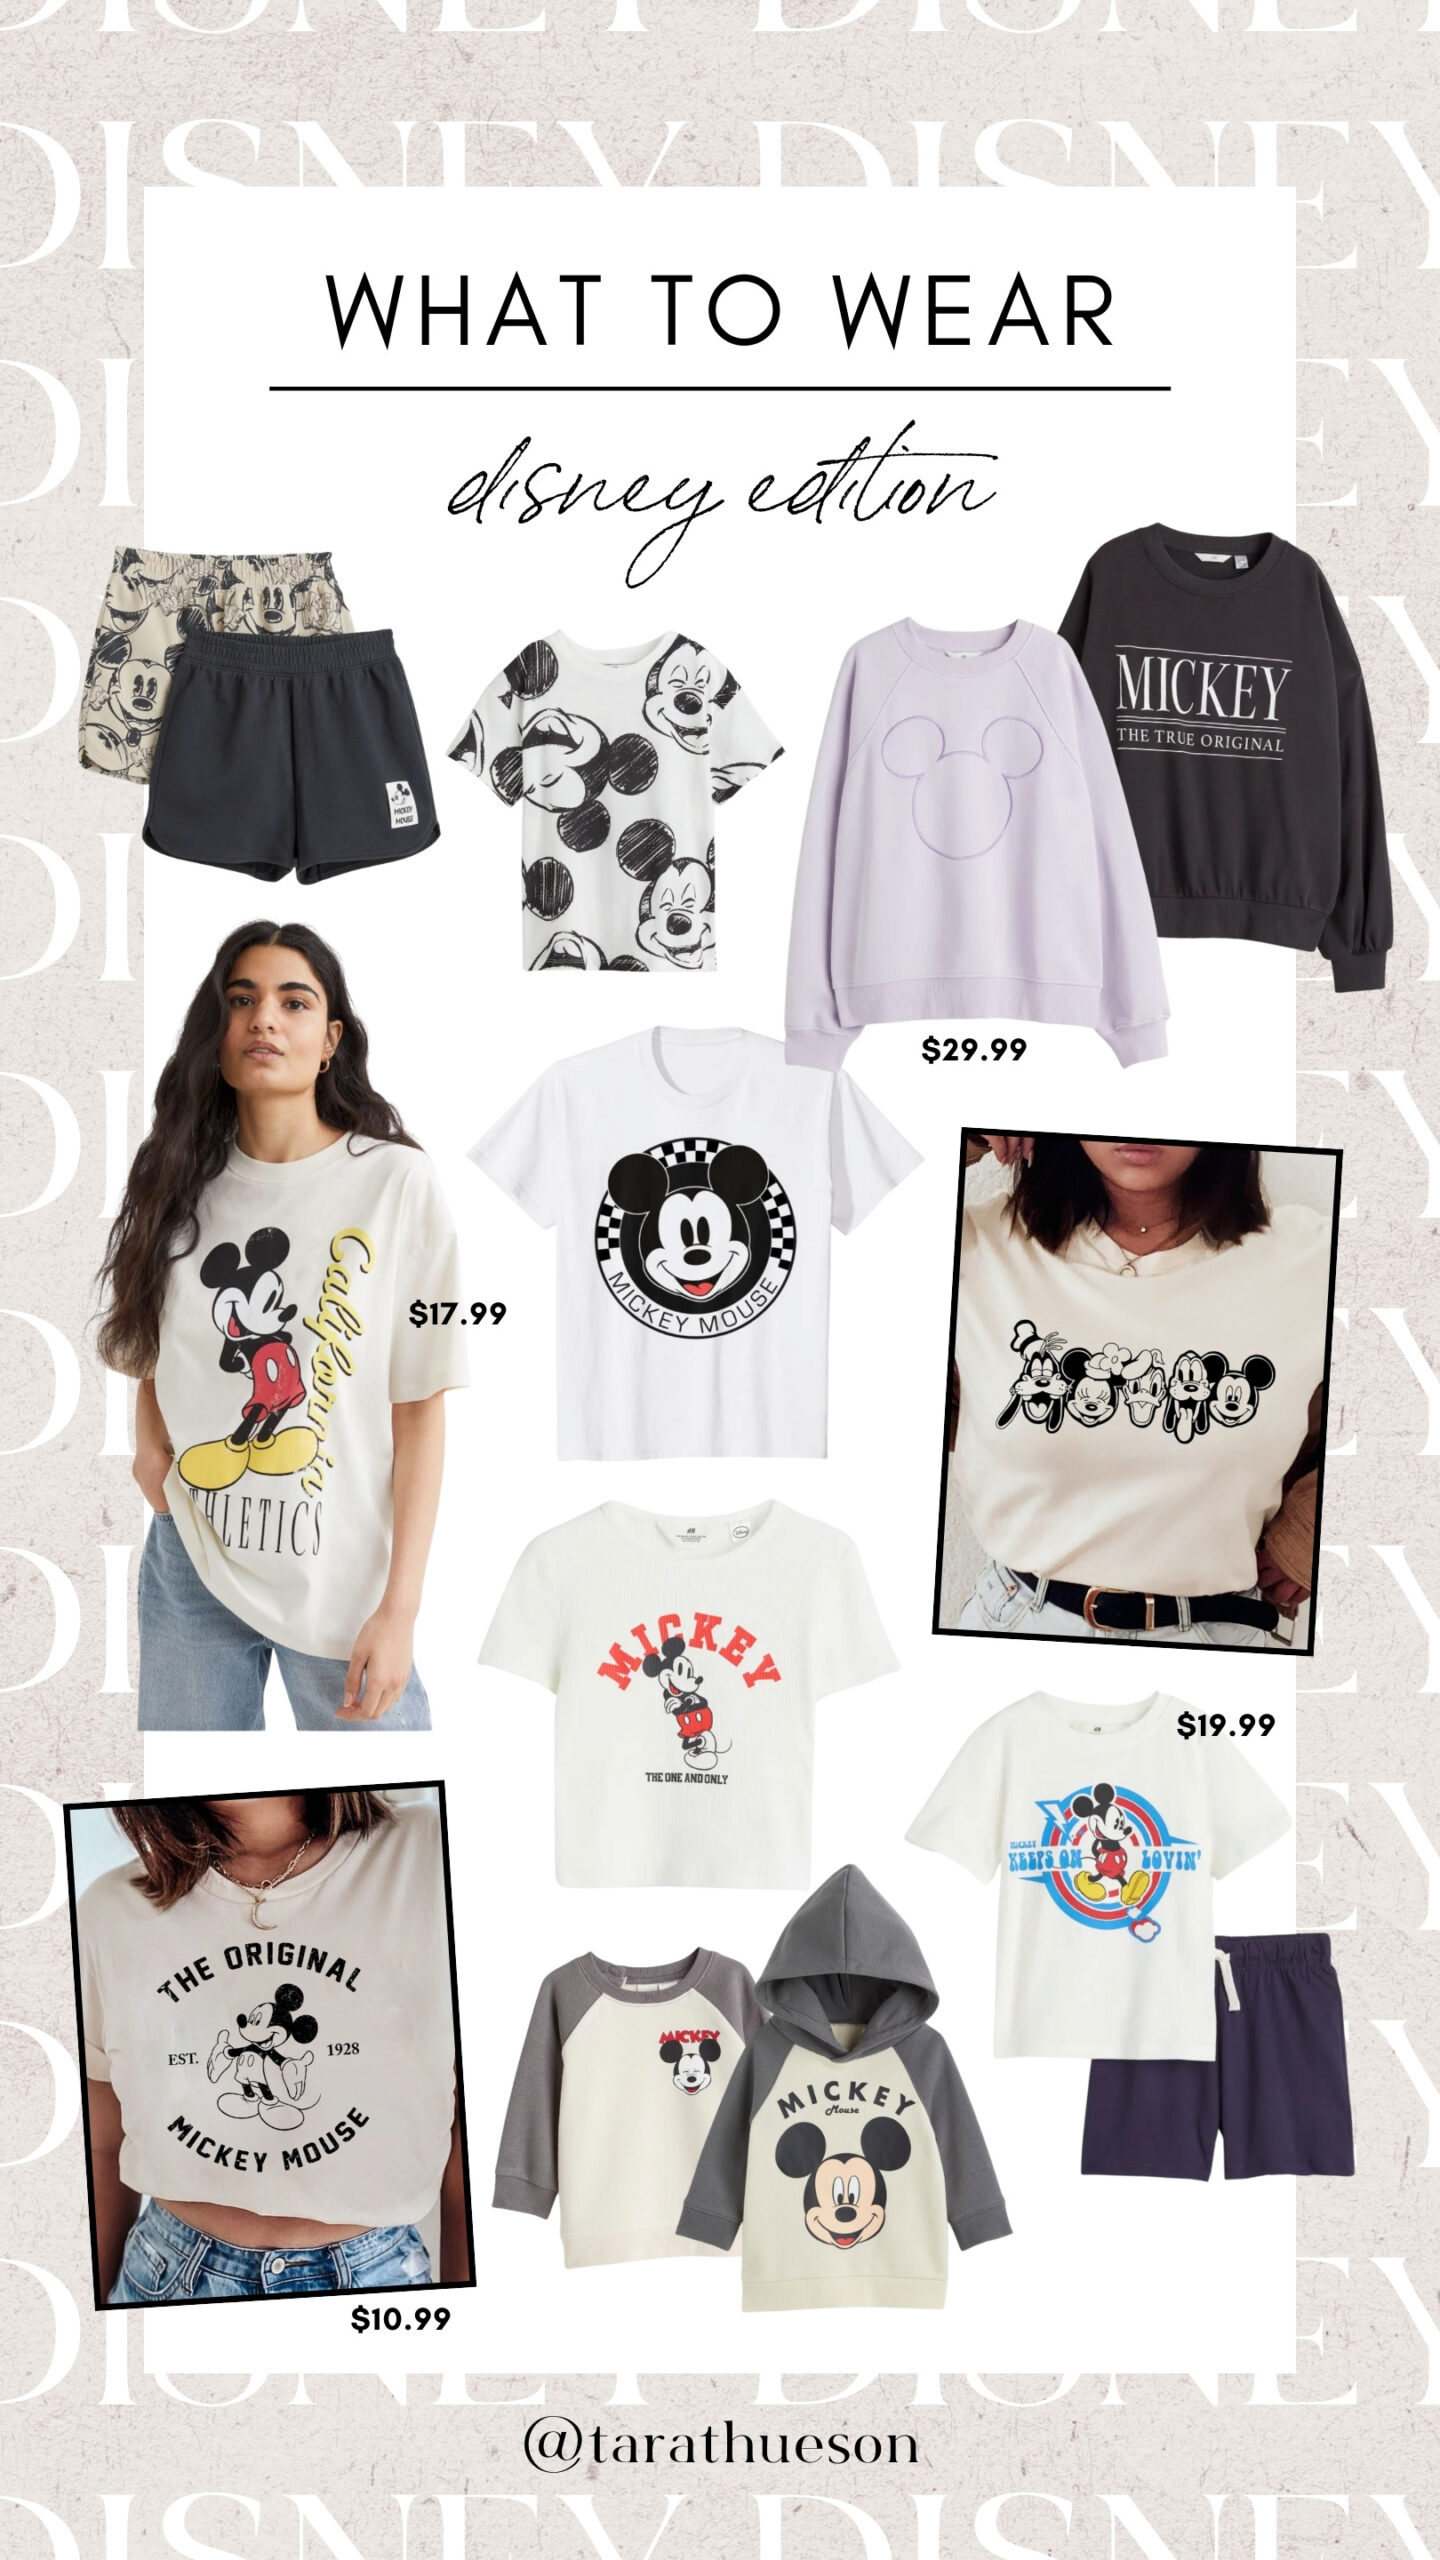 What to wear: Disney + Marvel